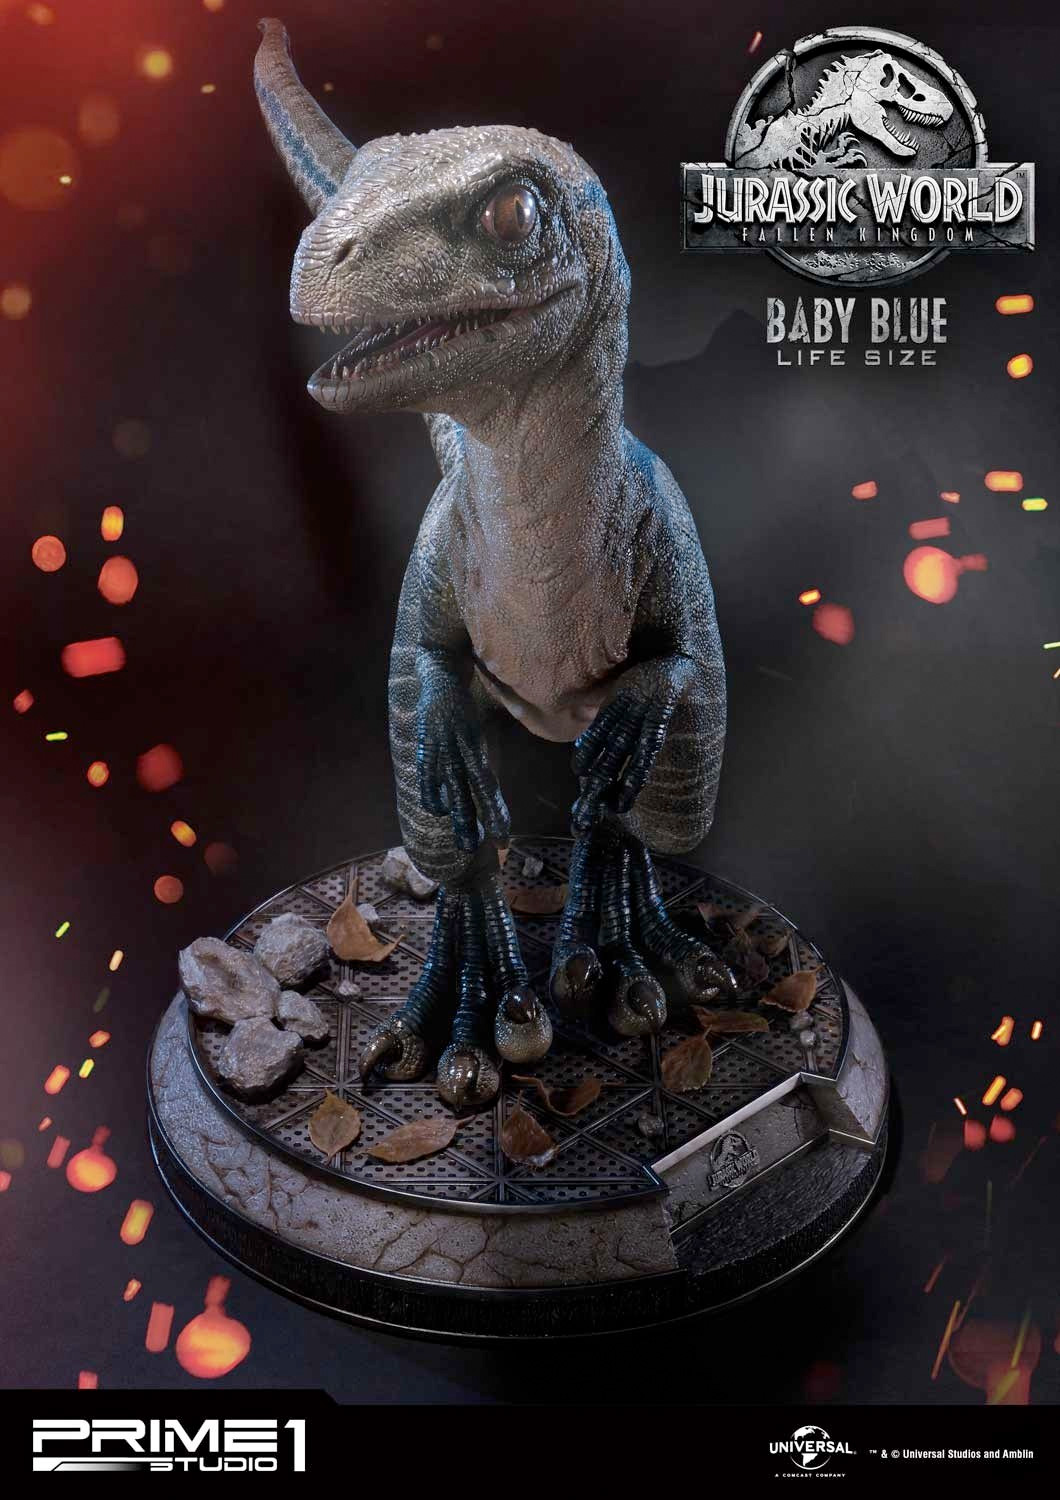 Cool Stuff Pick Up Your Own Life Size Baby Blue Velociraptor Statue